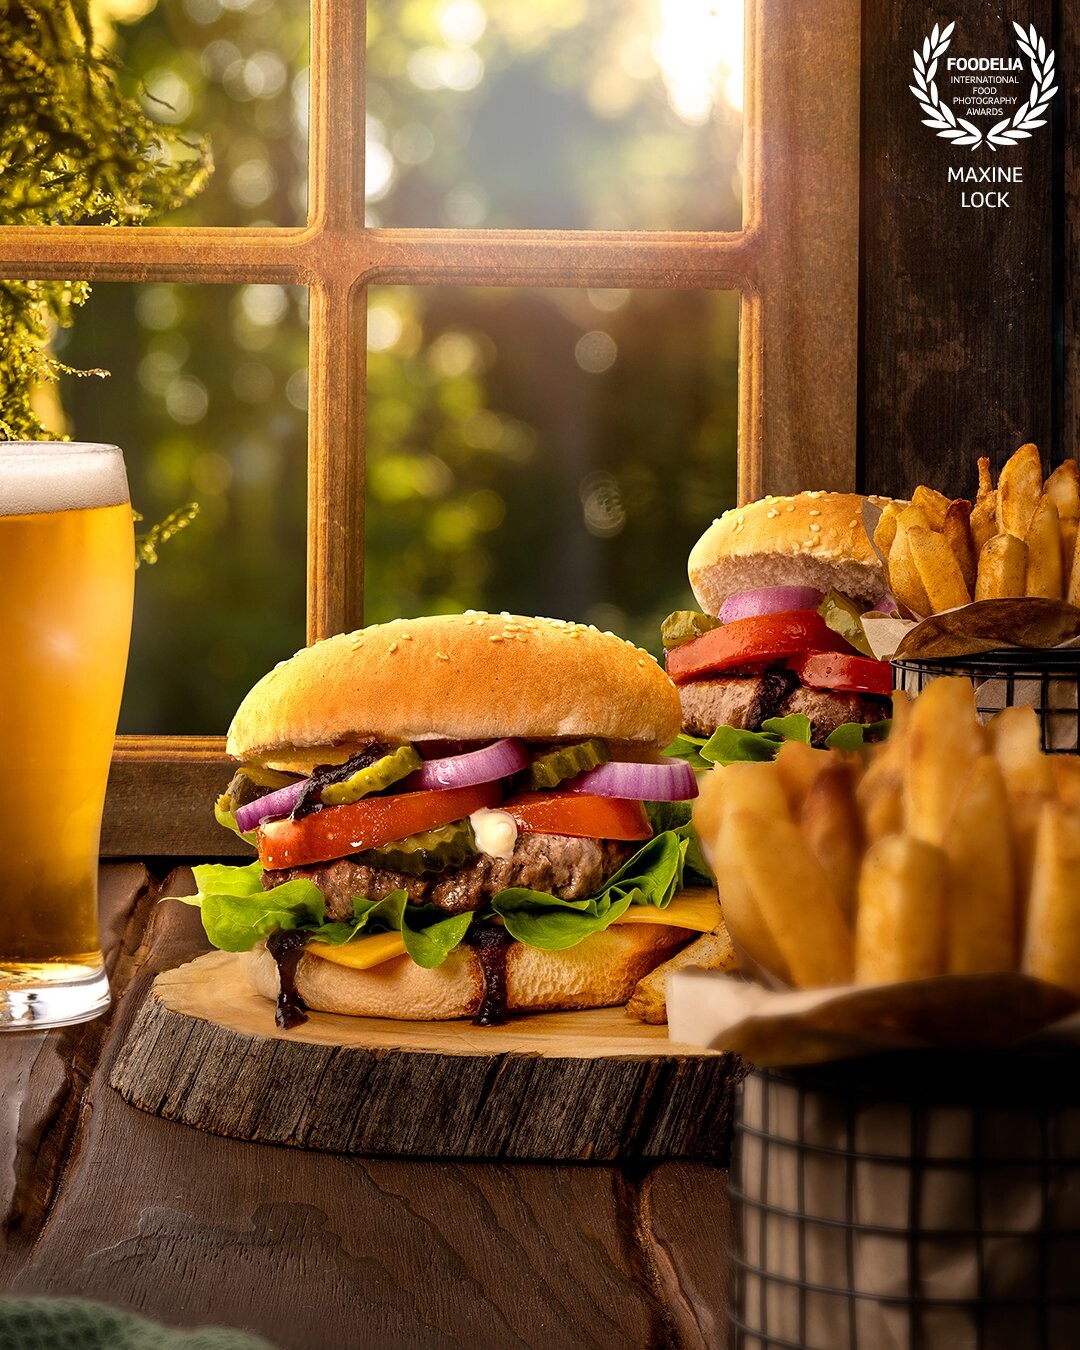 Burgers & fries, with a beer on the side, sitting on a table next to a window with sunlight pouring through; shining through the glass of beer.